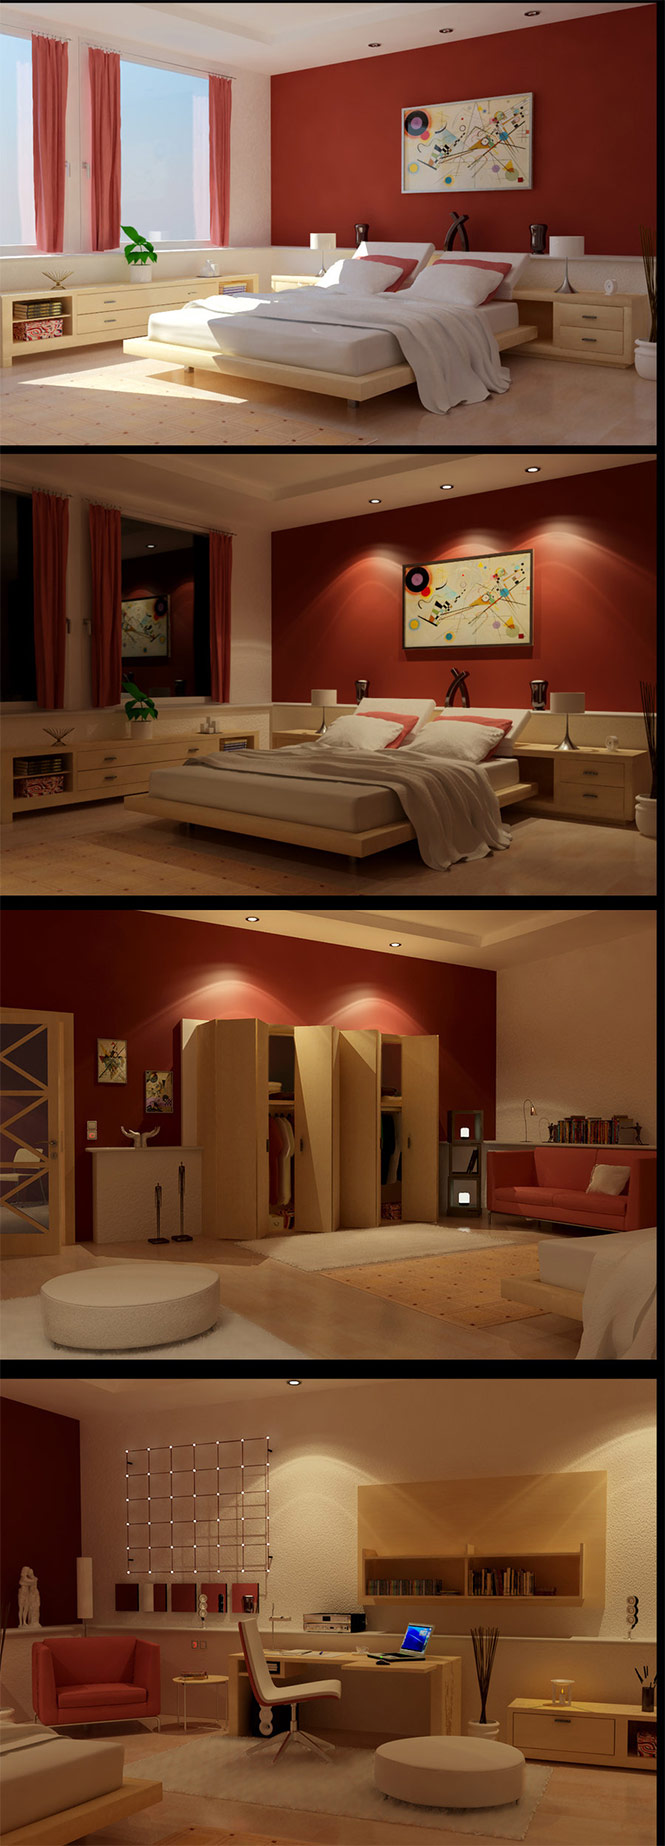 Also by ZigShot82. This bedroom uses a softer shade of red, and incorporates a lighter shade of wood to give off a more tranquil vibe. A beautiful office and closet area are included.